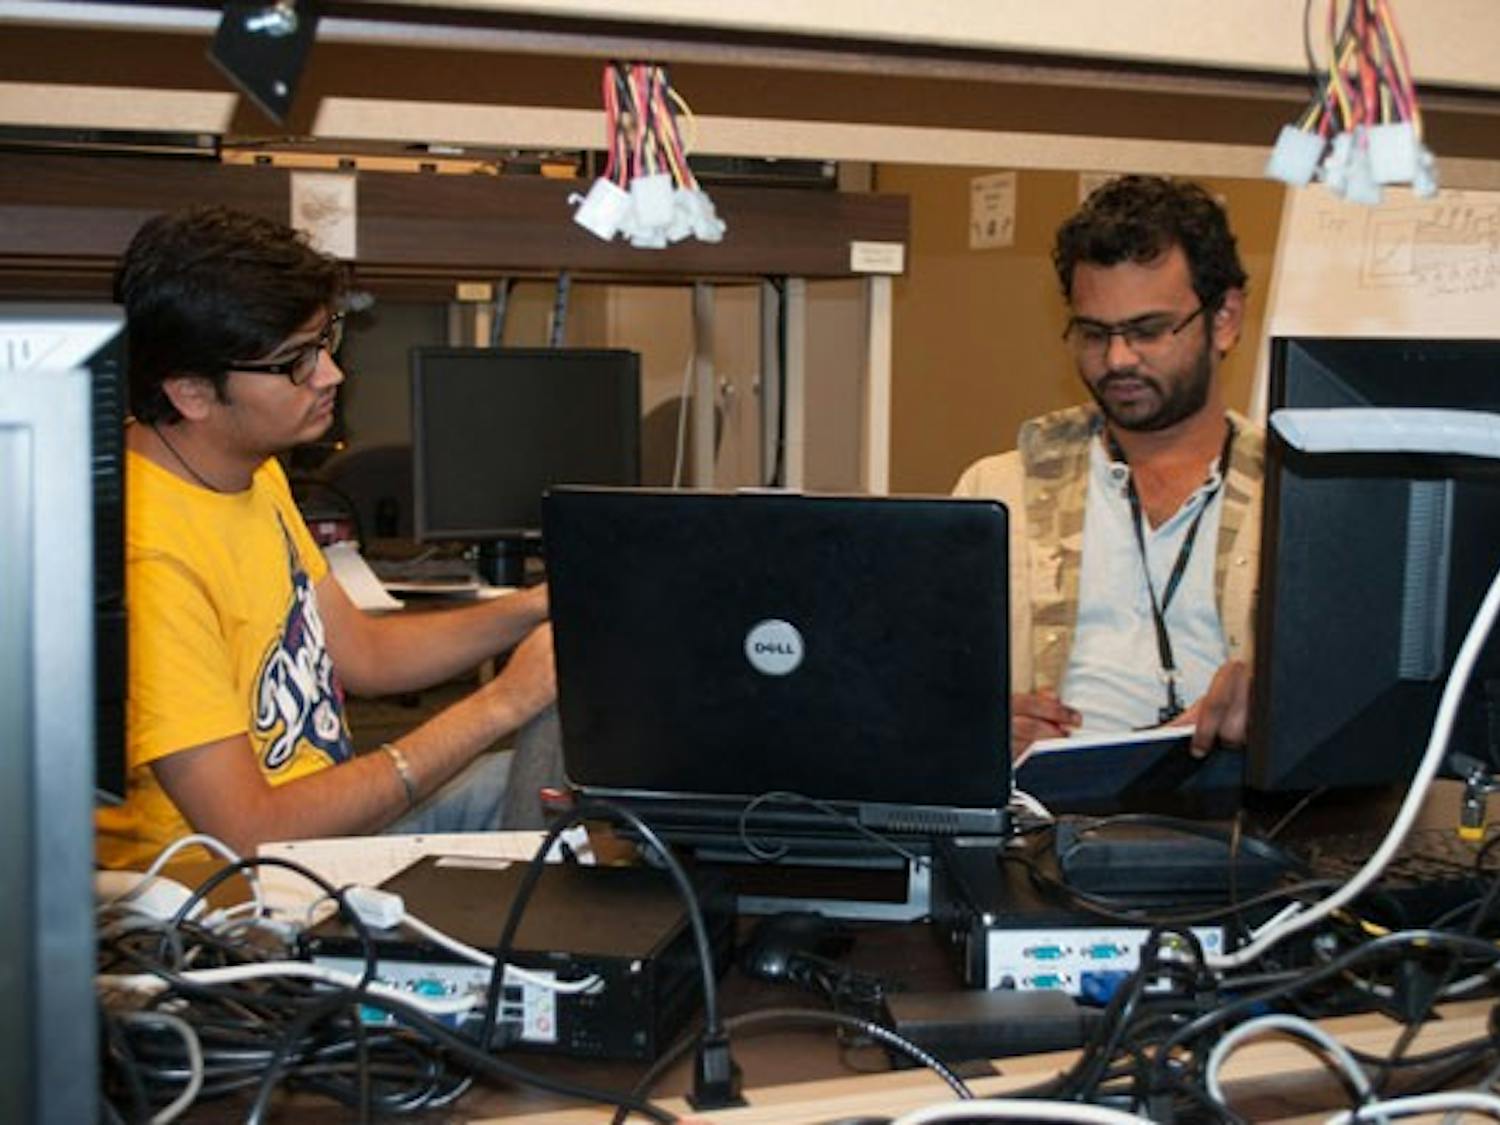 Imtiyaz Hussain and Koshik Samoth, both computer science graduate students, work on a group project in the engineering lab of the Ira A. Fulton Schools of Engineering on the Tempe campus on Sunday afternoon. The engineering program is currently focusing on getting their first-year students more experience to better prepare them for the work force after graduation. (Photo by Danielle Gregory)